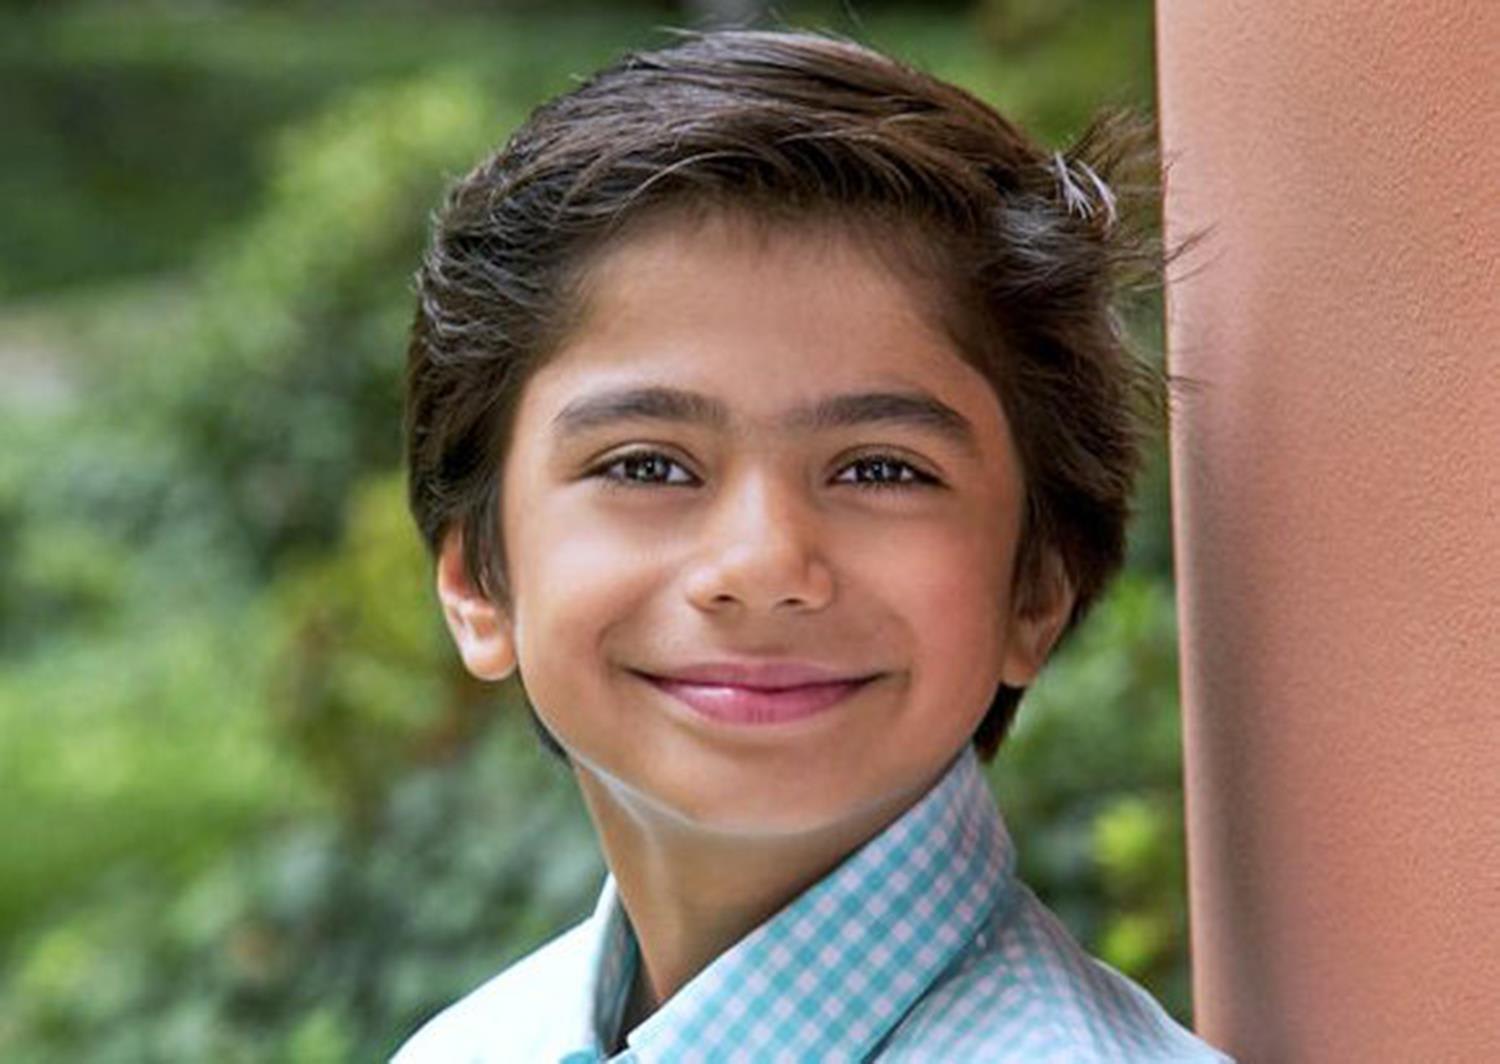 Ten-Year-Old Neel Sethi To Make Film Debut In 'The Jungle Book'